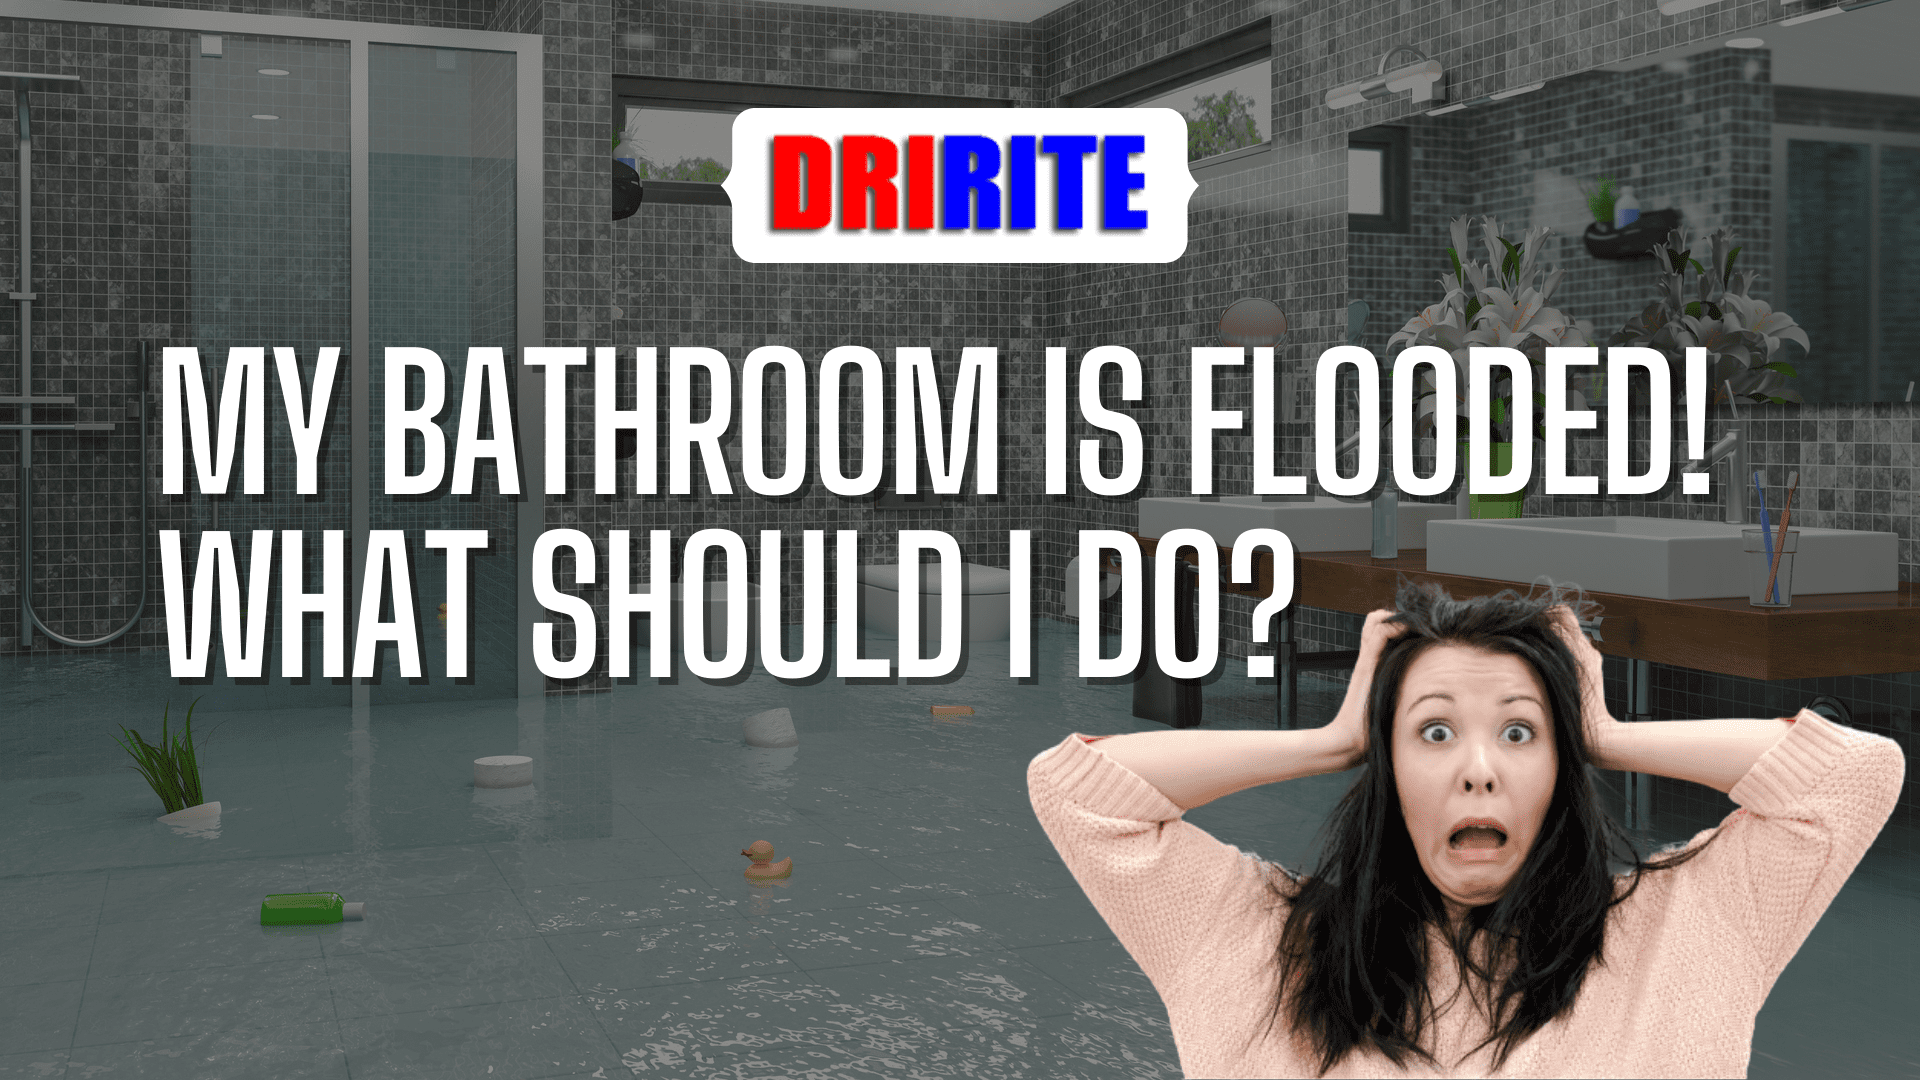 My Bathroom Is Flooded! What Should I Do